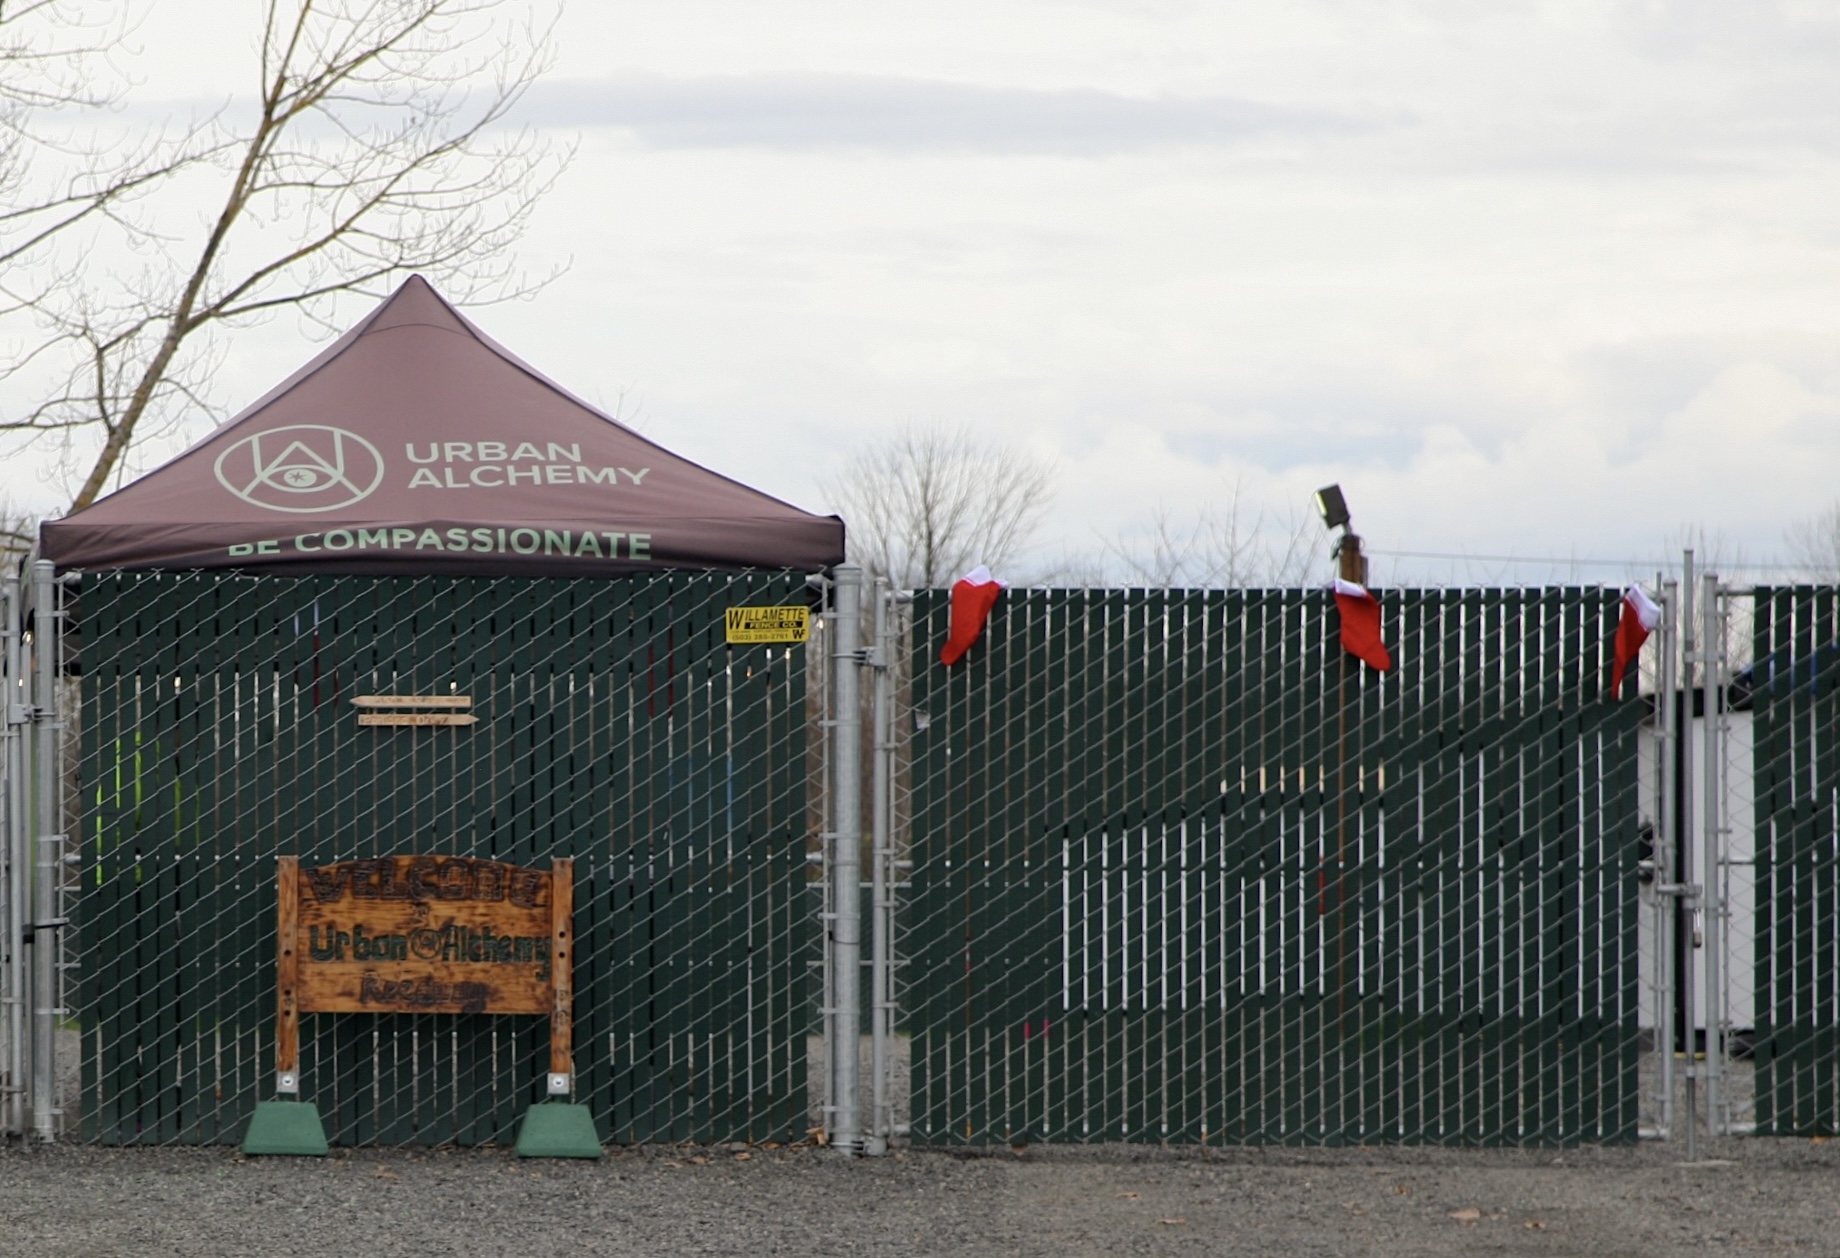 The exterior of the Reedway Safe Rest Village covered by a green fence. Behind the fence is a canopy tent that says "Urban Alchemy. Be compassionate."